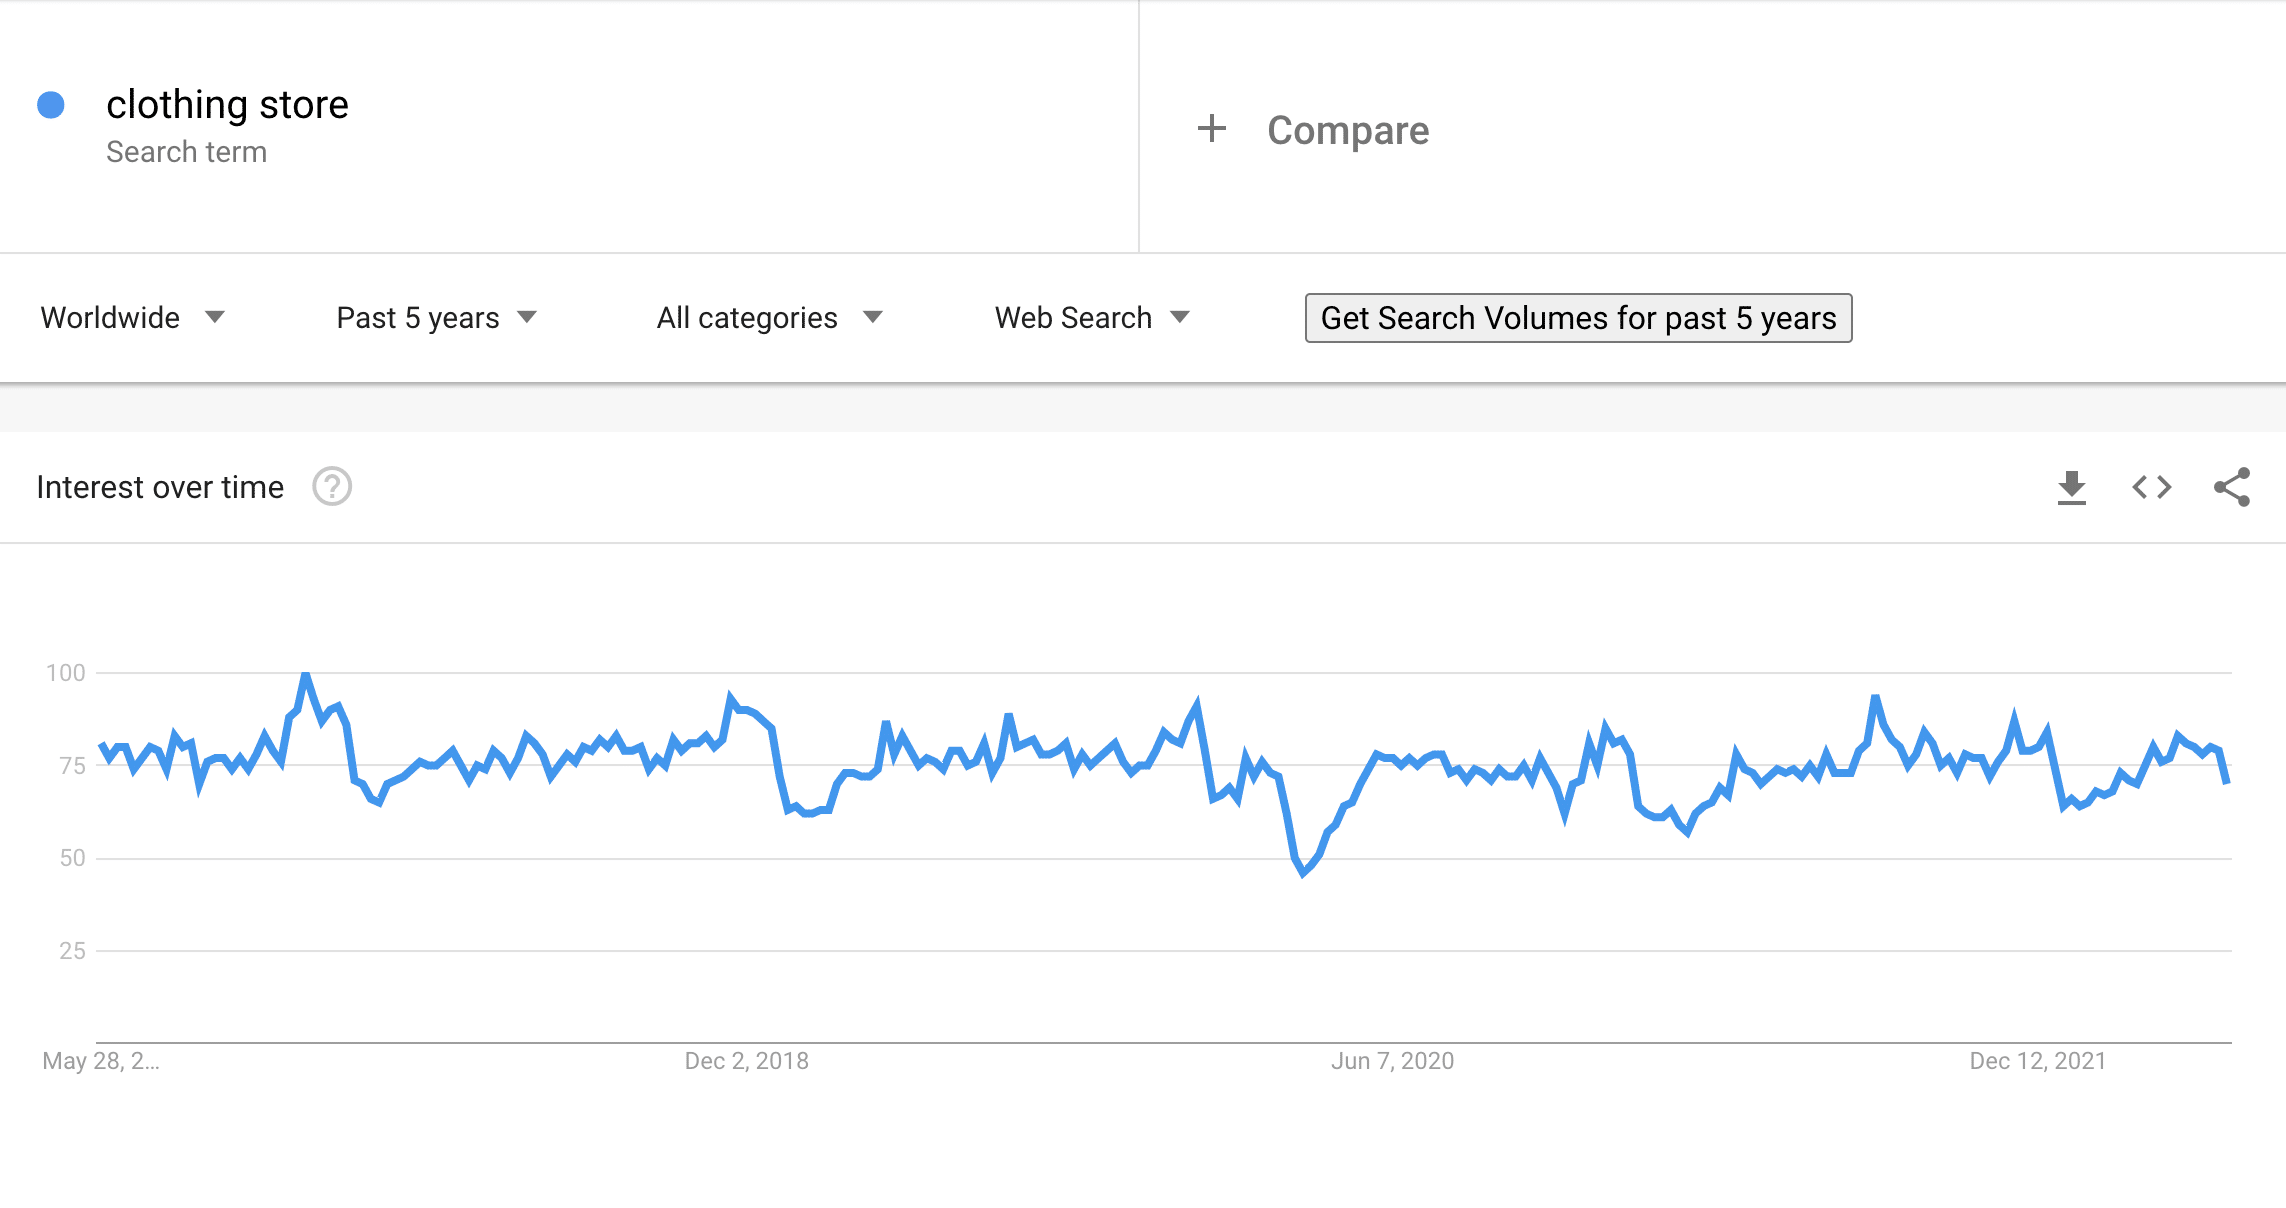 Clothing store on Google Trends